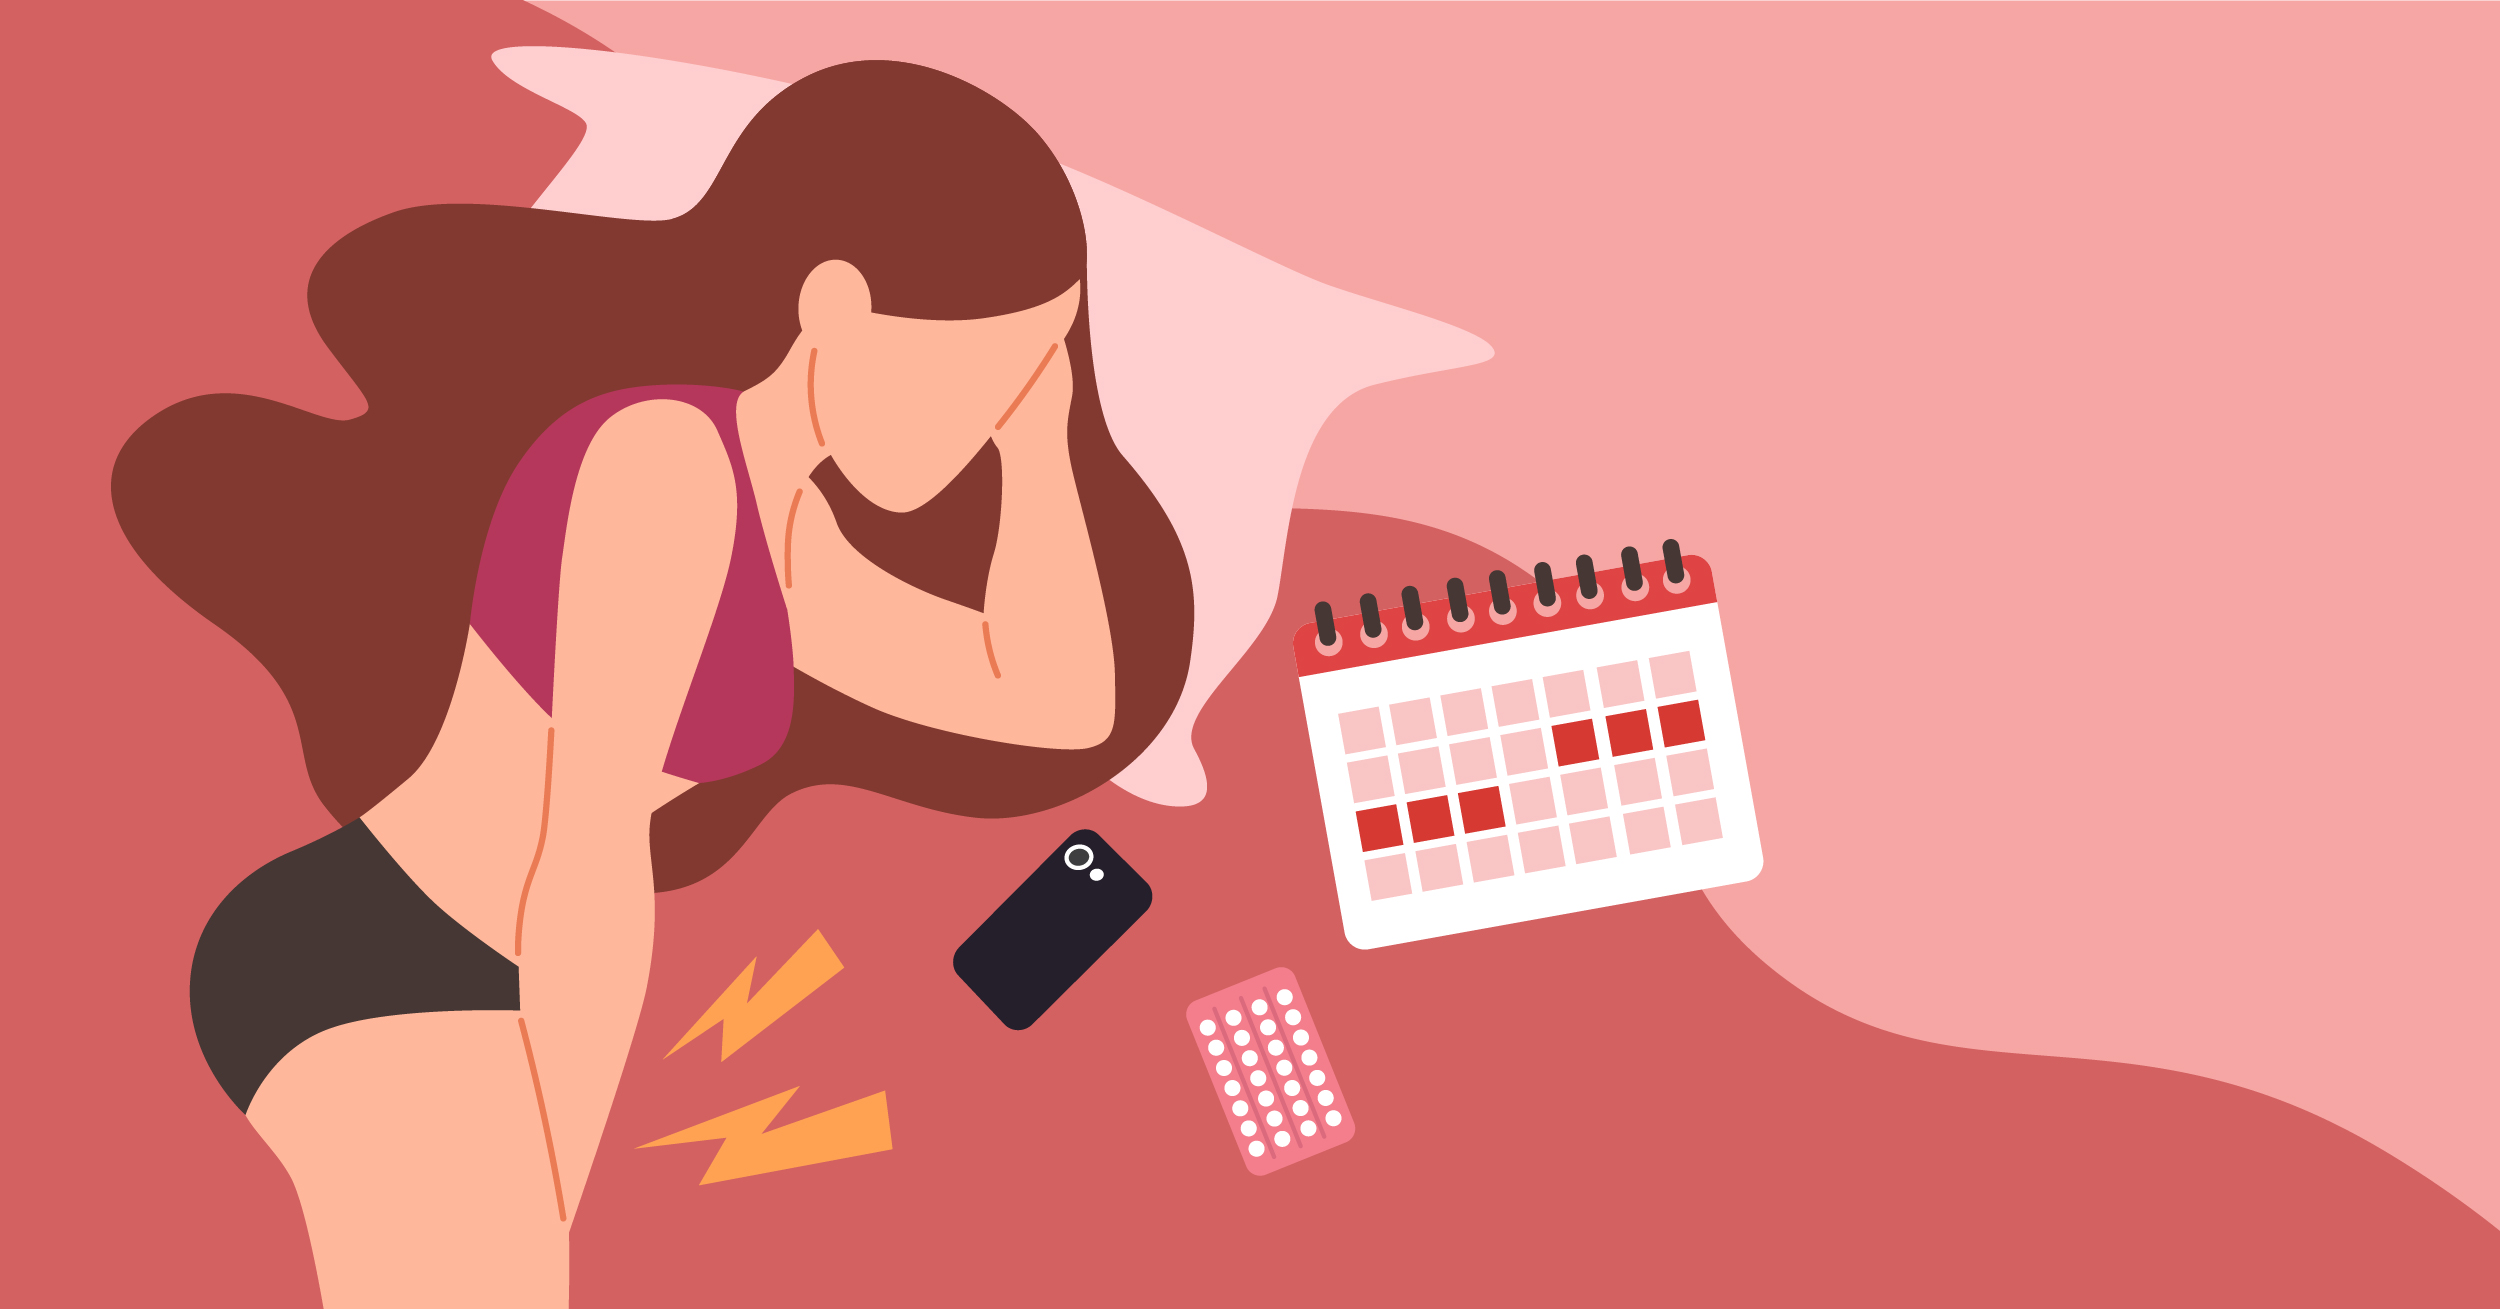 4 Phases of the Menstrual Cycle & What You’ll Feel for Each Phase